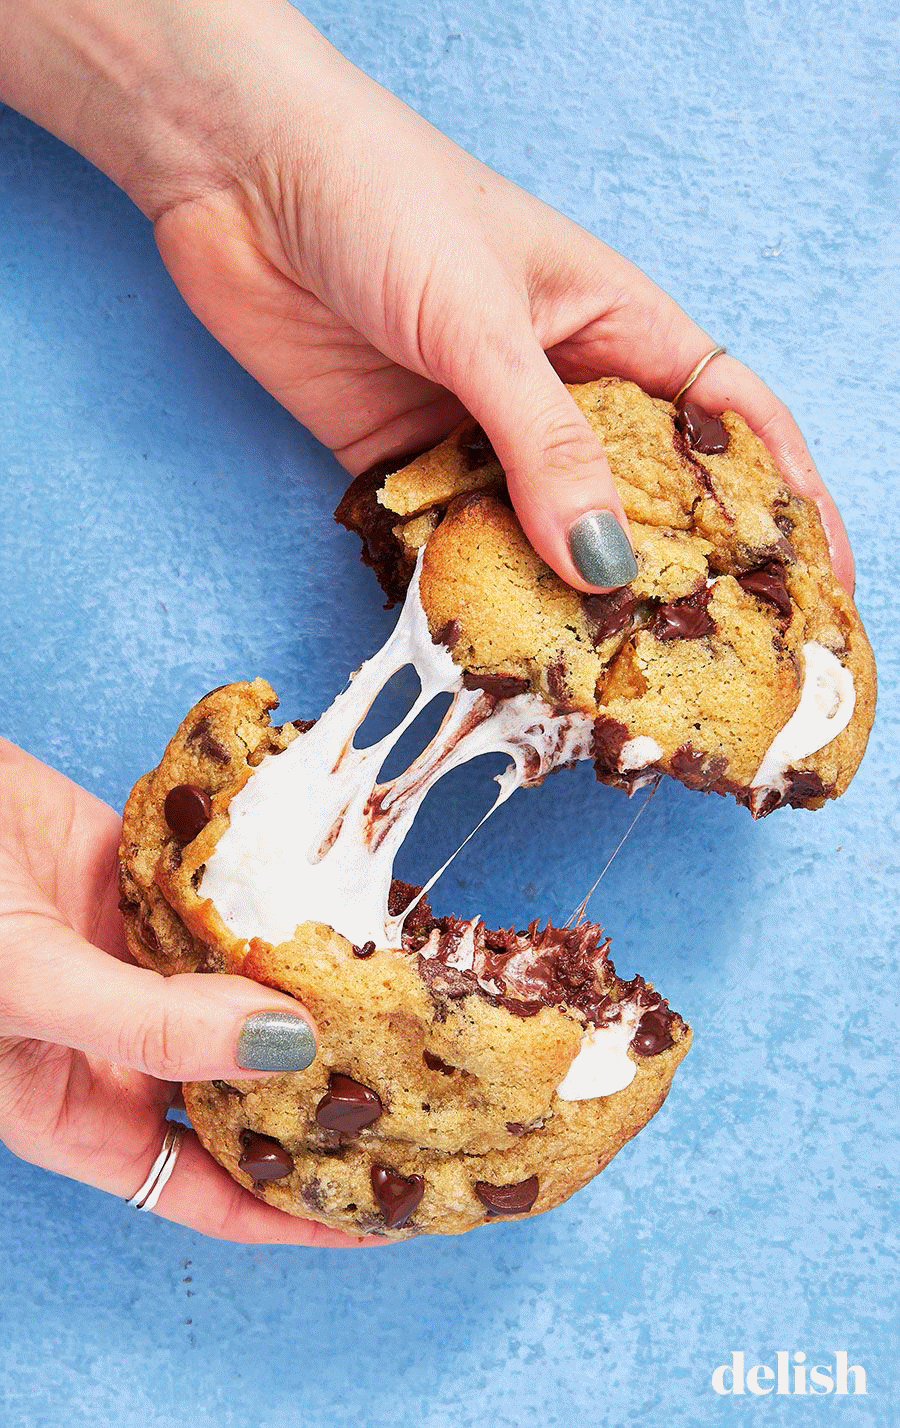 no joke these cookies are stuffed with marshmallow and gif medium